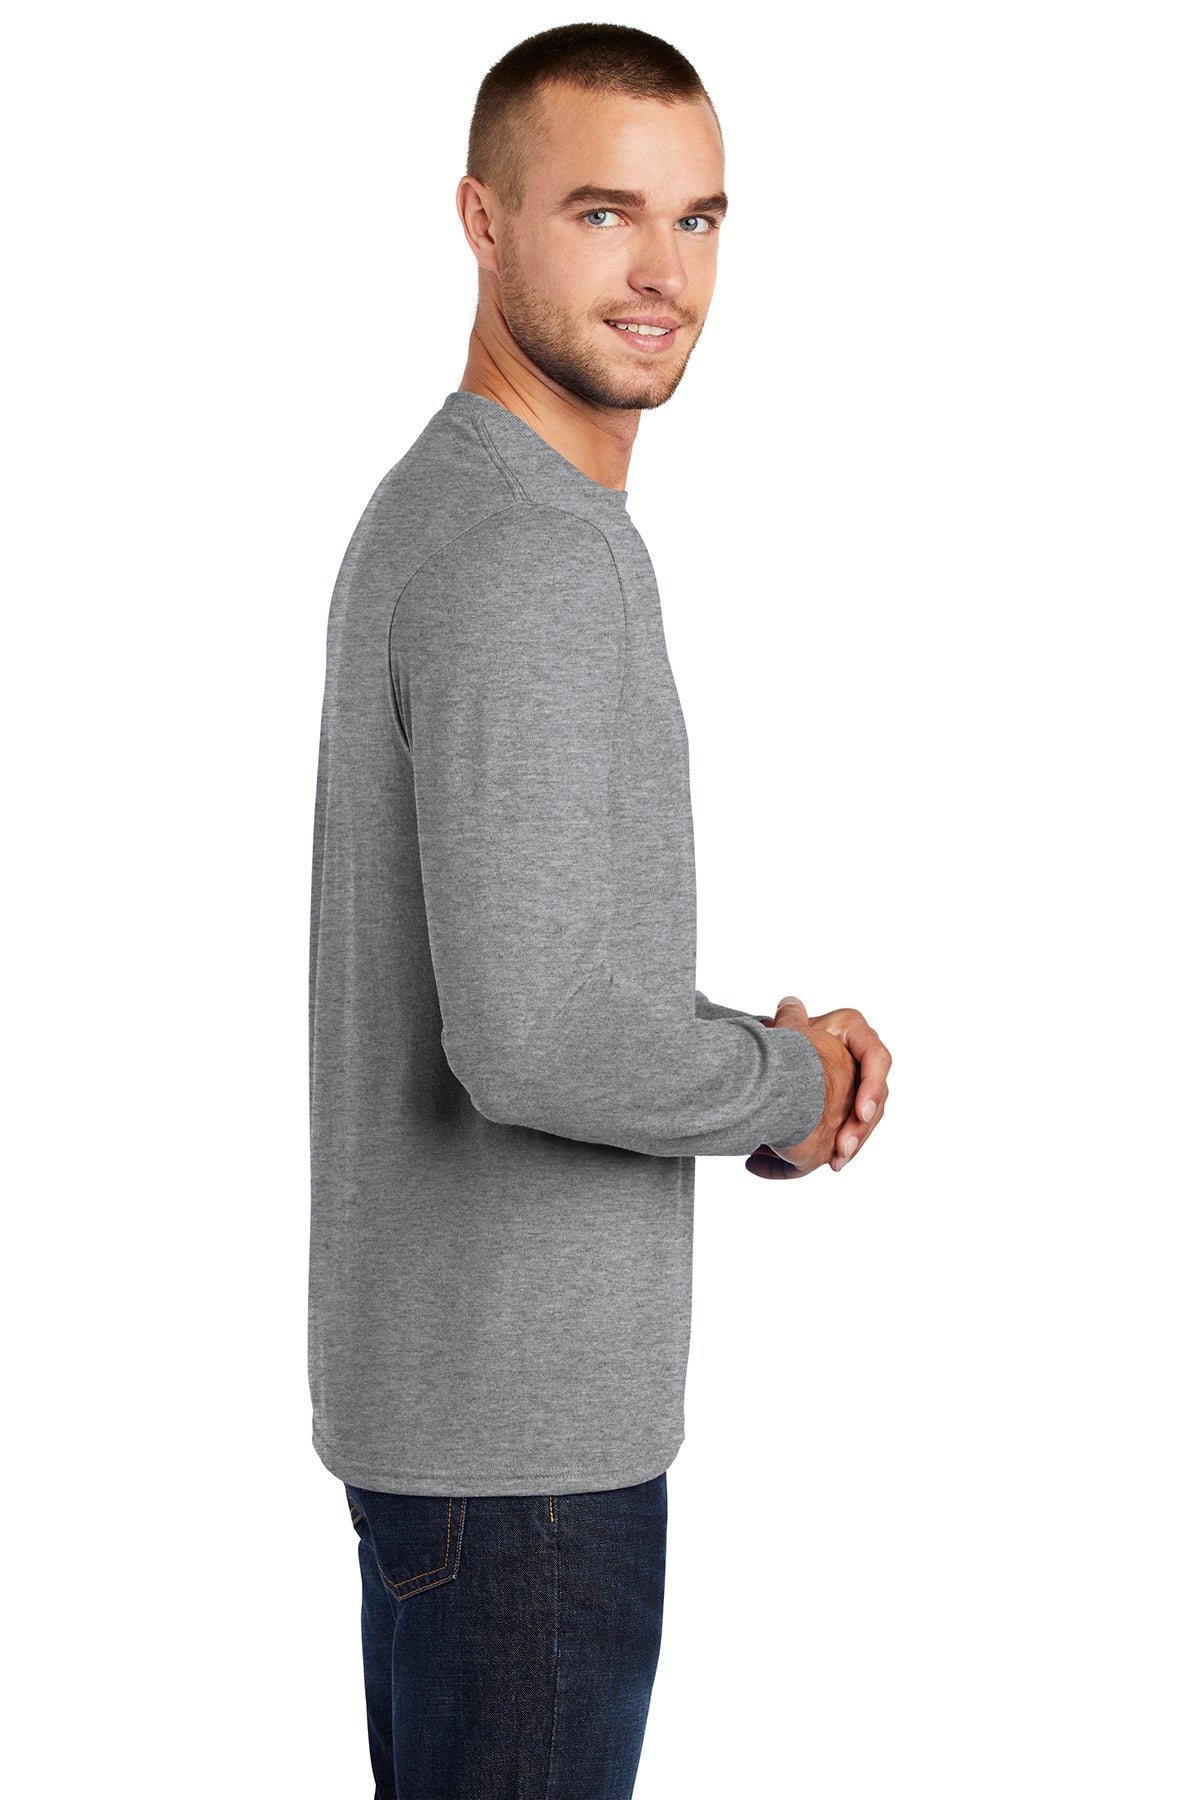 Port & Company Tall Long Sleeve Branded Core Blend Tee's, Athletic Heather